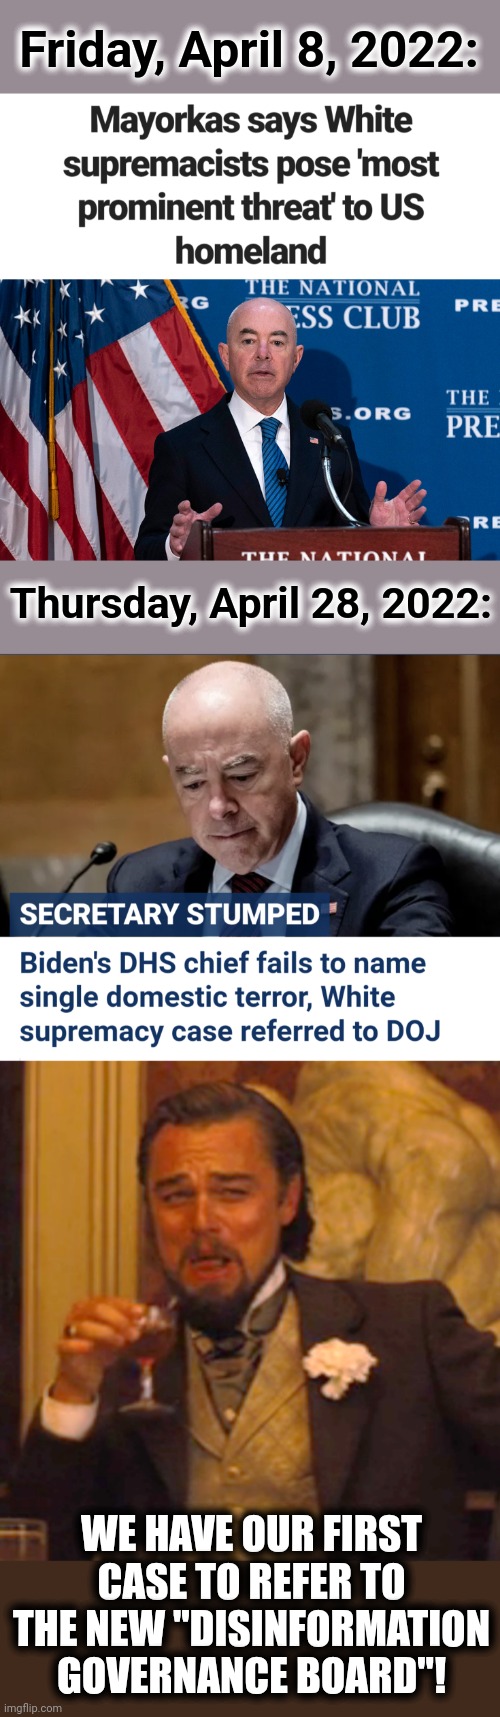 Call 1-800-DHS-BULLCRAP! | Friday, April 8, 2022:; Thursday, April 28, 2022:; WE HAVE OUR FIRST CASE TO REFER TO THE NEW "DISINFORMATION GOVERNANCE BOARD"! | image tagged in memes,laughing leo,department of homeland security,alejandro mayorkas,white supremacists,democrats | made w/ Imgflip meme maker